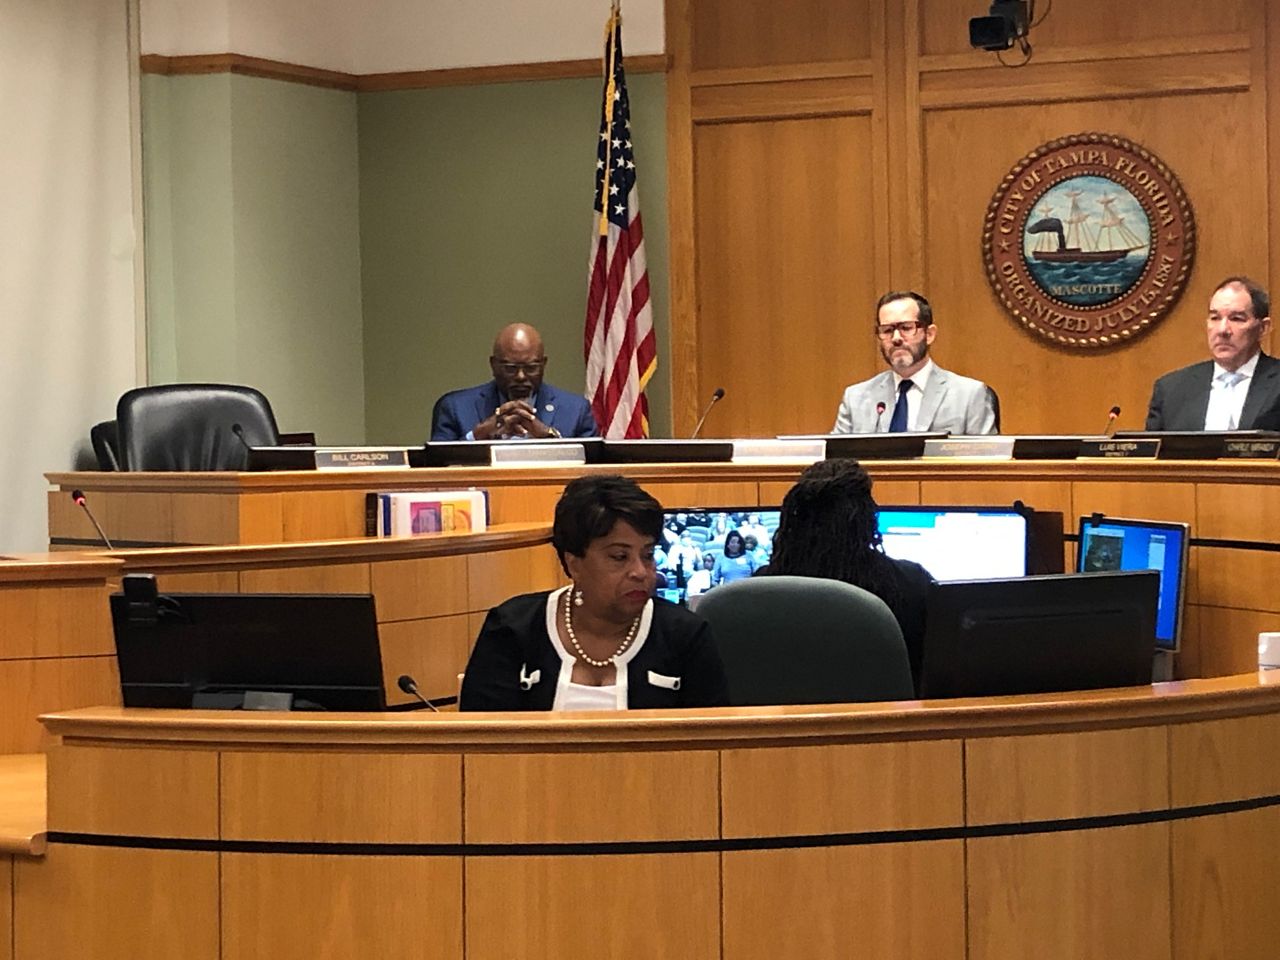 Tampa City Council Member Orlando Gudes announced that he will not be resigning, but will be stepping down as Chairman during a city council meeting Thursday. (Tampa City Council)